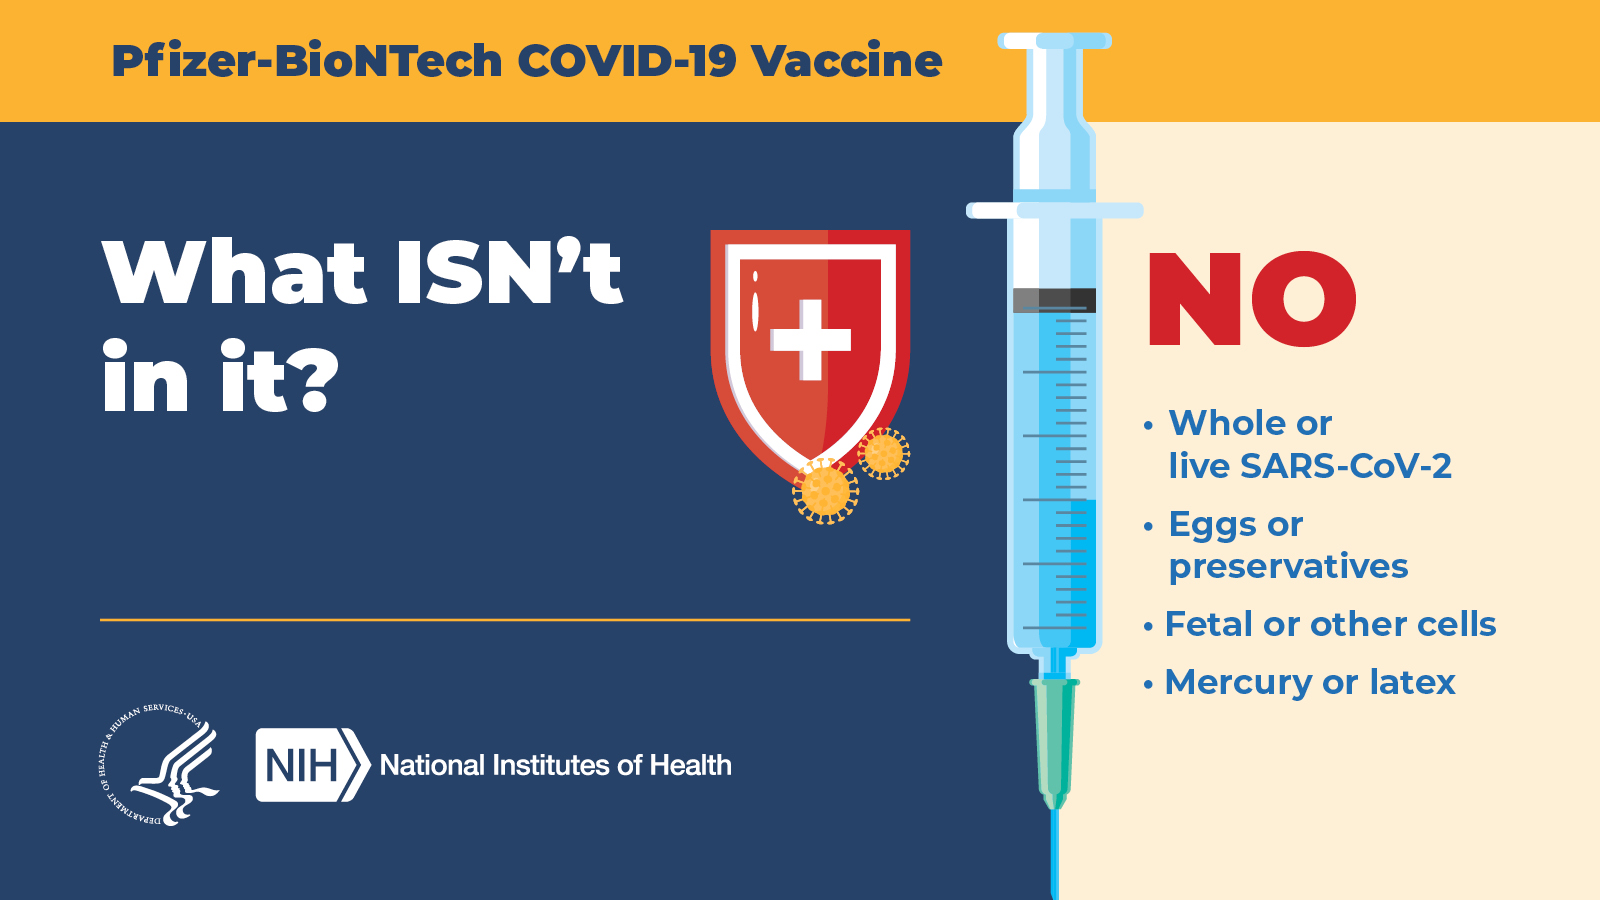 Pfizer-BioNTech COV ID-19 Vaccine  |  What isn't in it?  |  NO: Whole or live SARS-CoV-2, Eggs or preservatives, fetal or other cells, mercury or latex